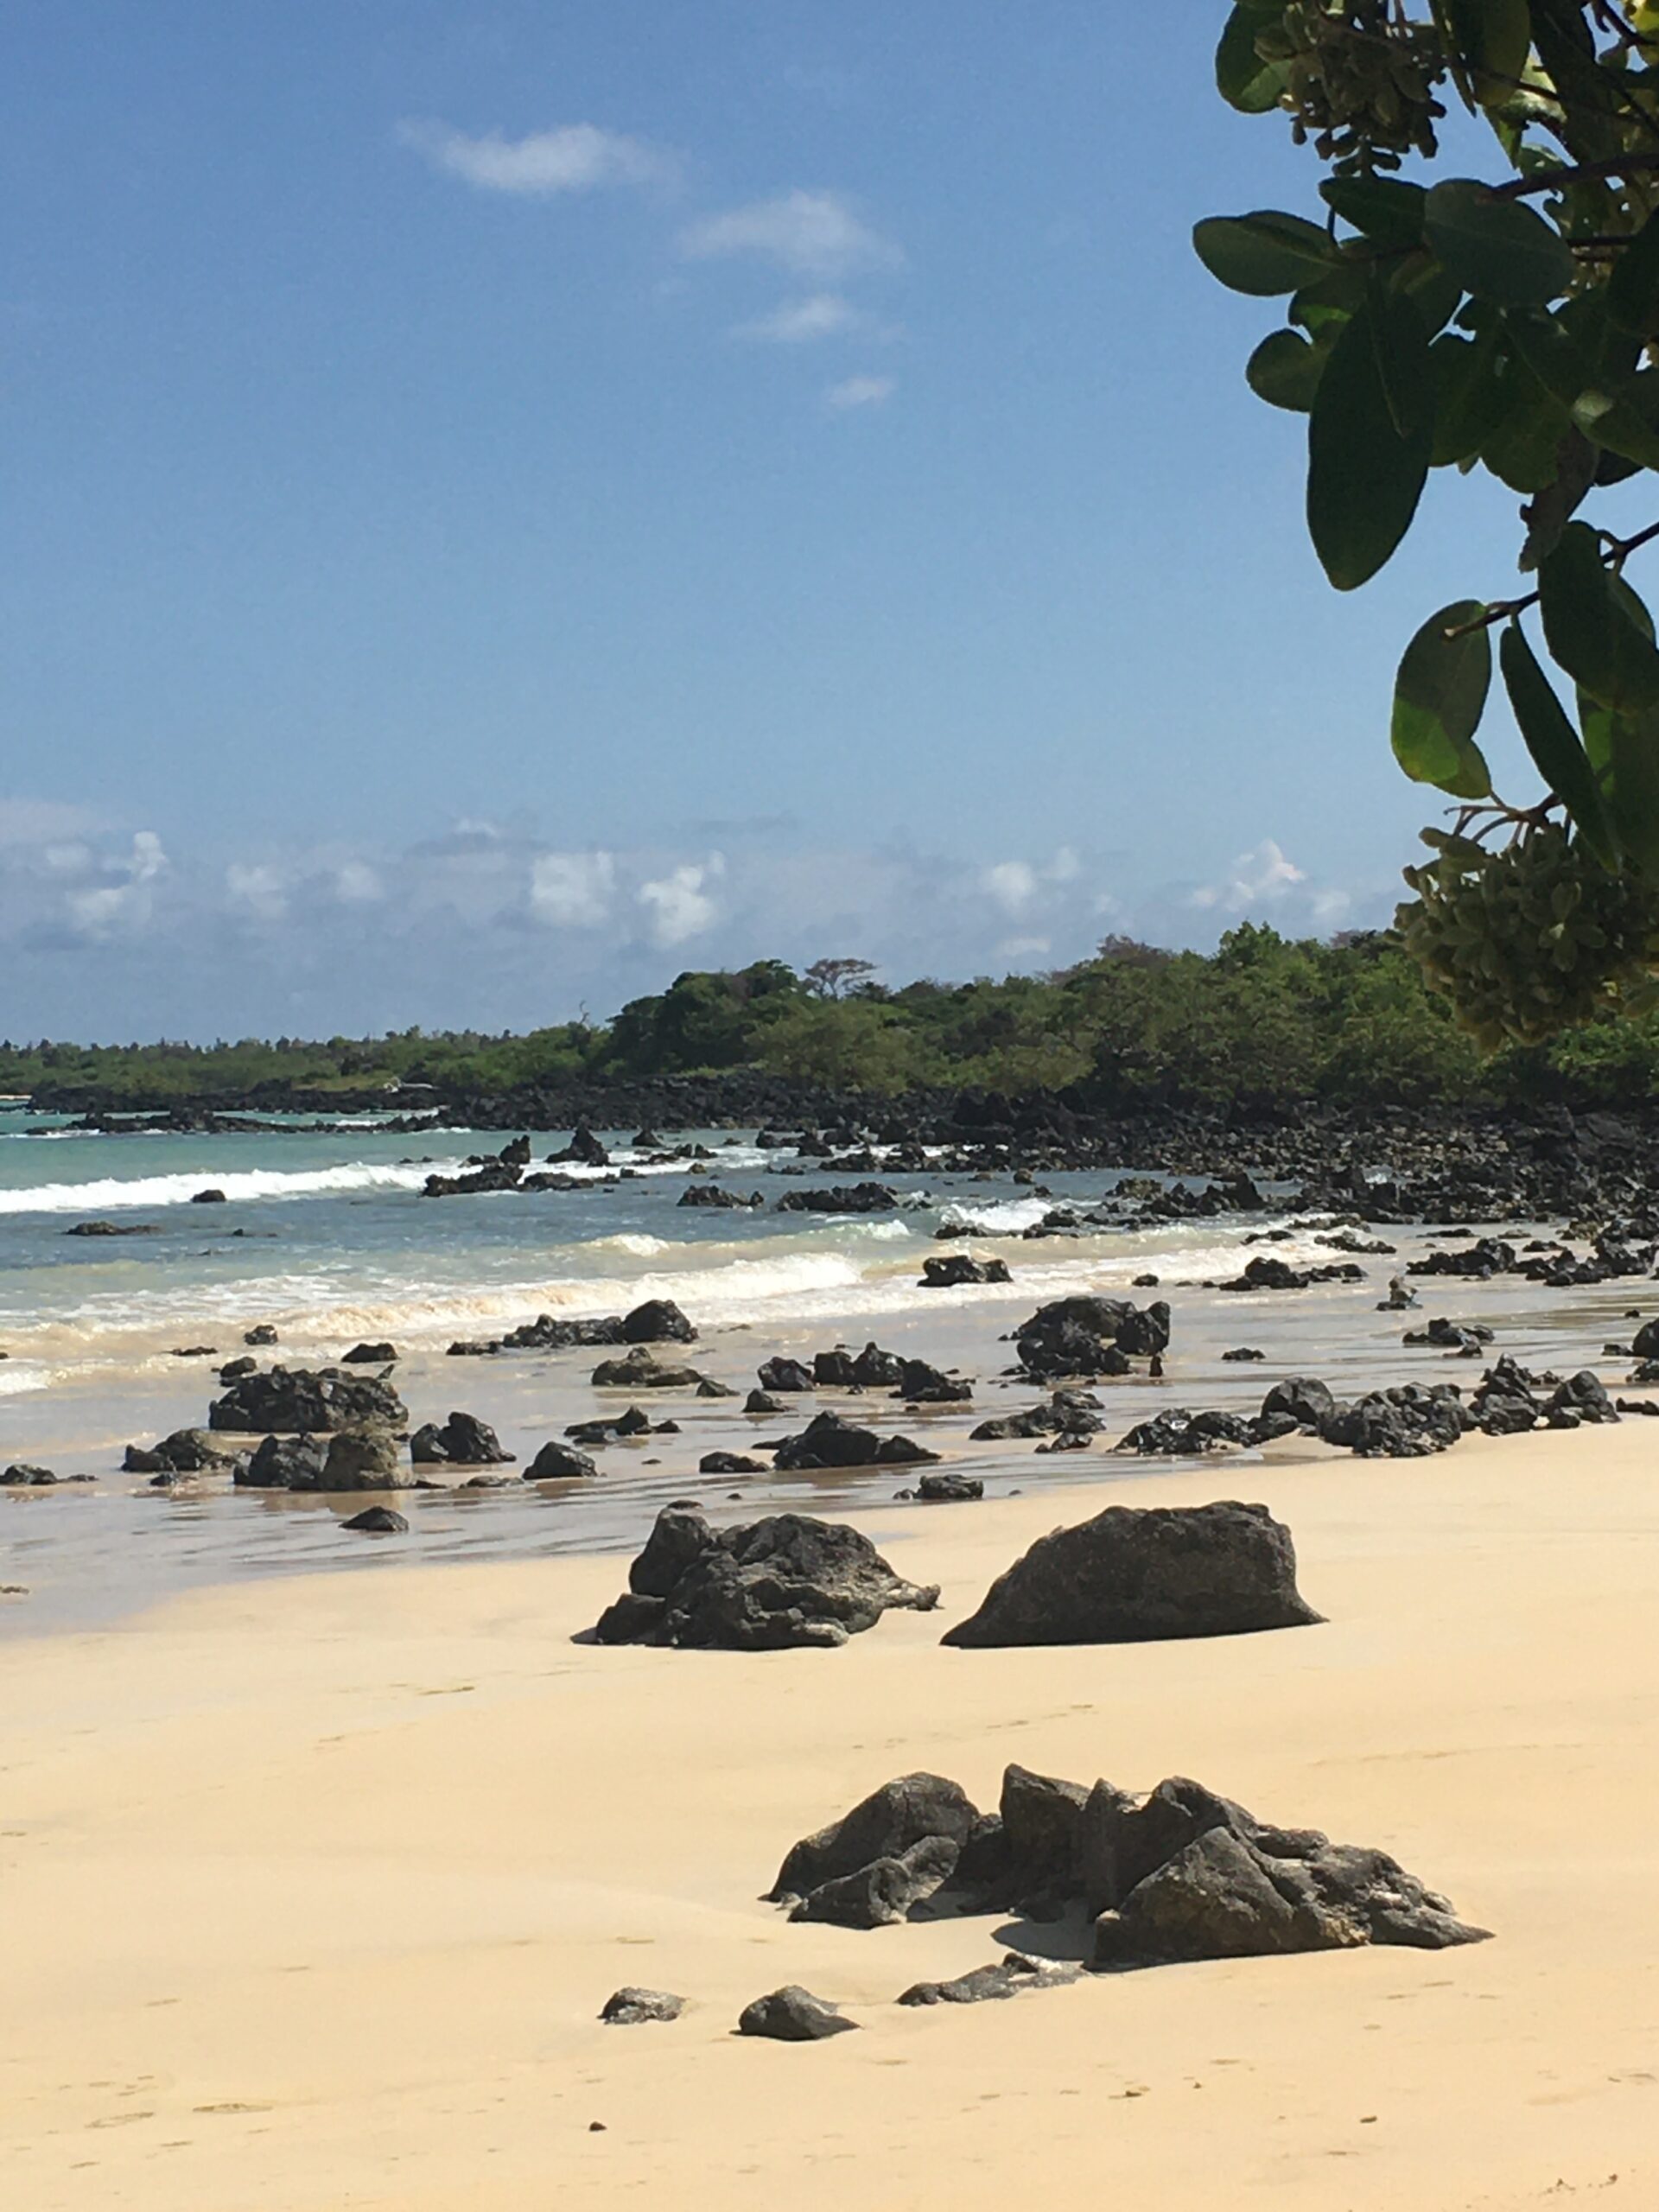 Pictured is a beach in Santa Cruz. On this beach, there is sand with larger rocks within the sand. In the further background are island trees and light waves coming towards the sand. 